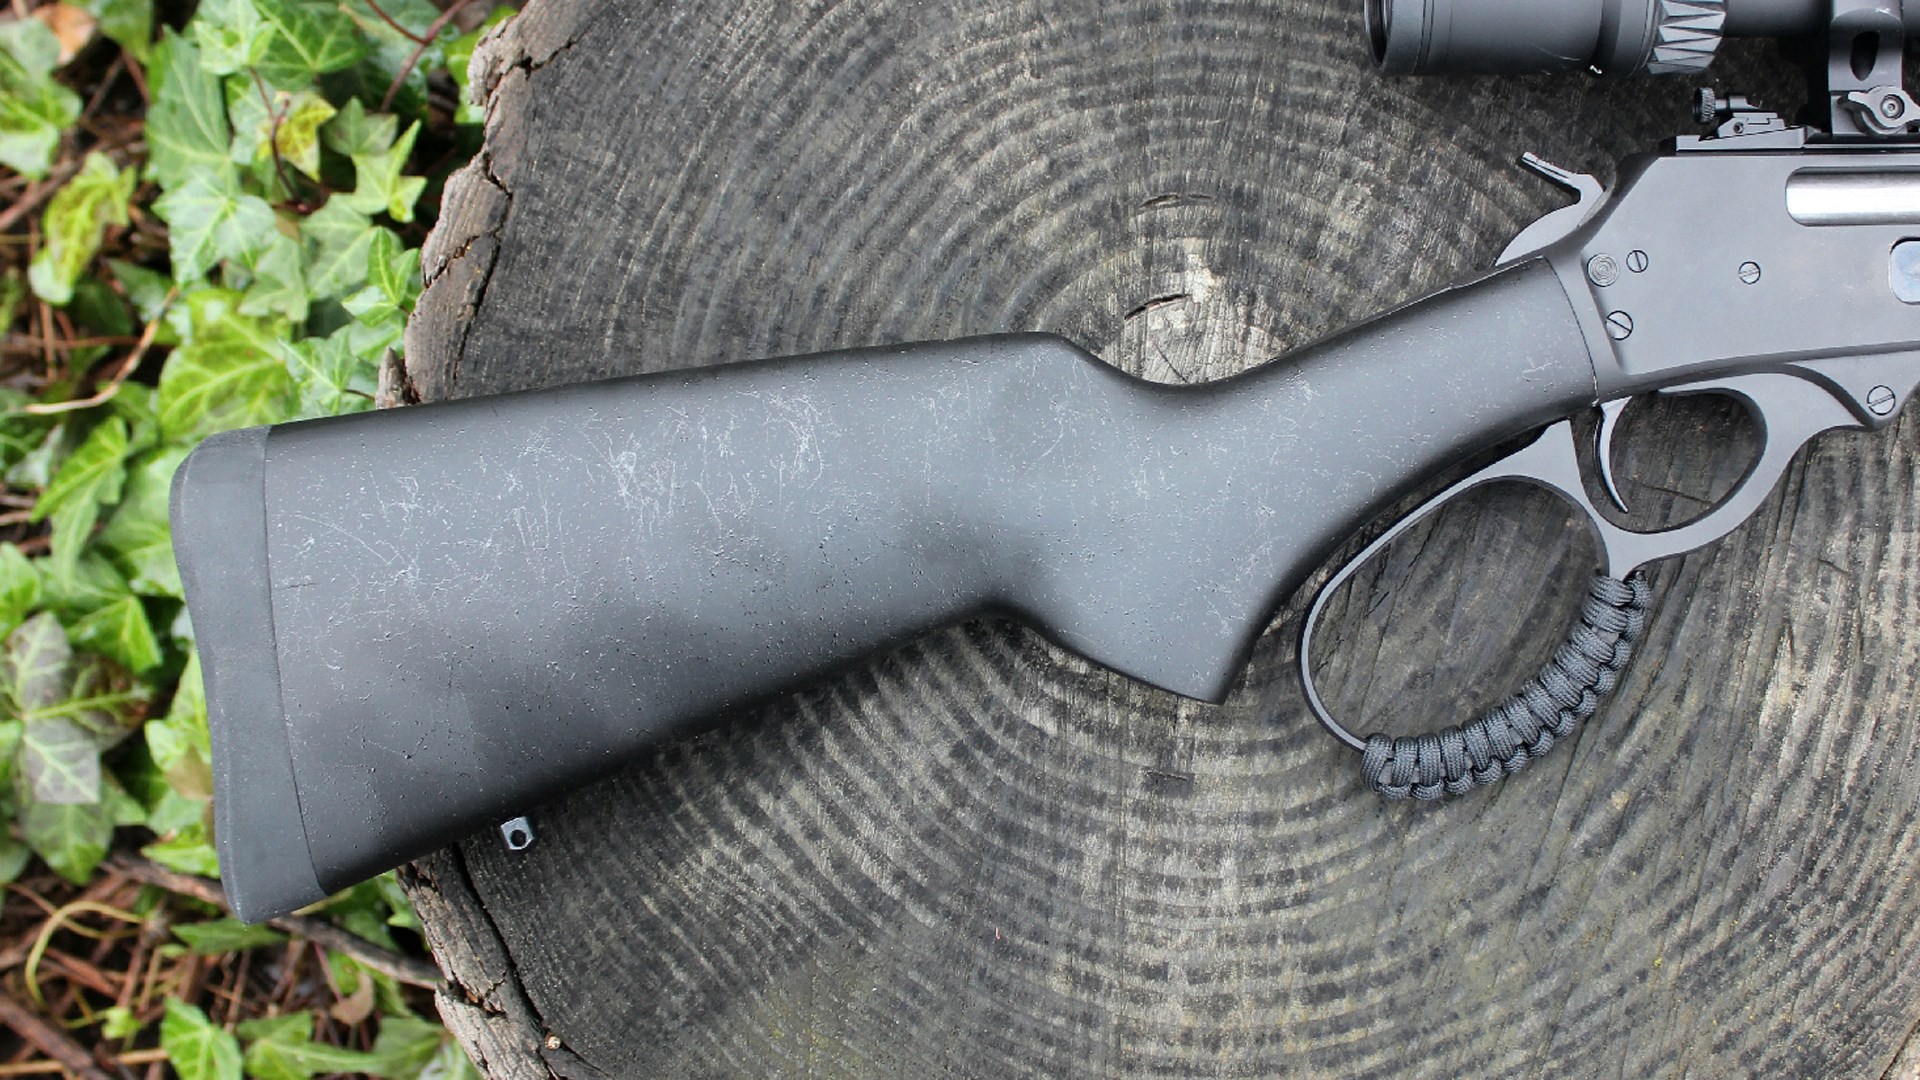 Rossi R95 Triple Black lever-action rifle black painted buttstock rubber recoil pad shown on stump outdoors green ivy background